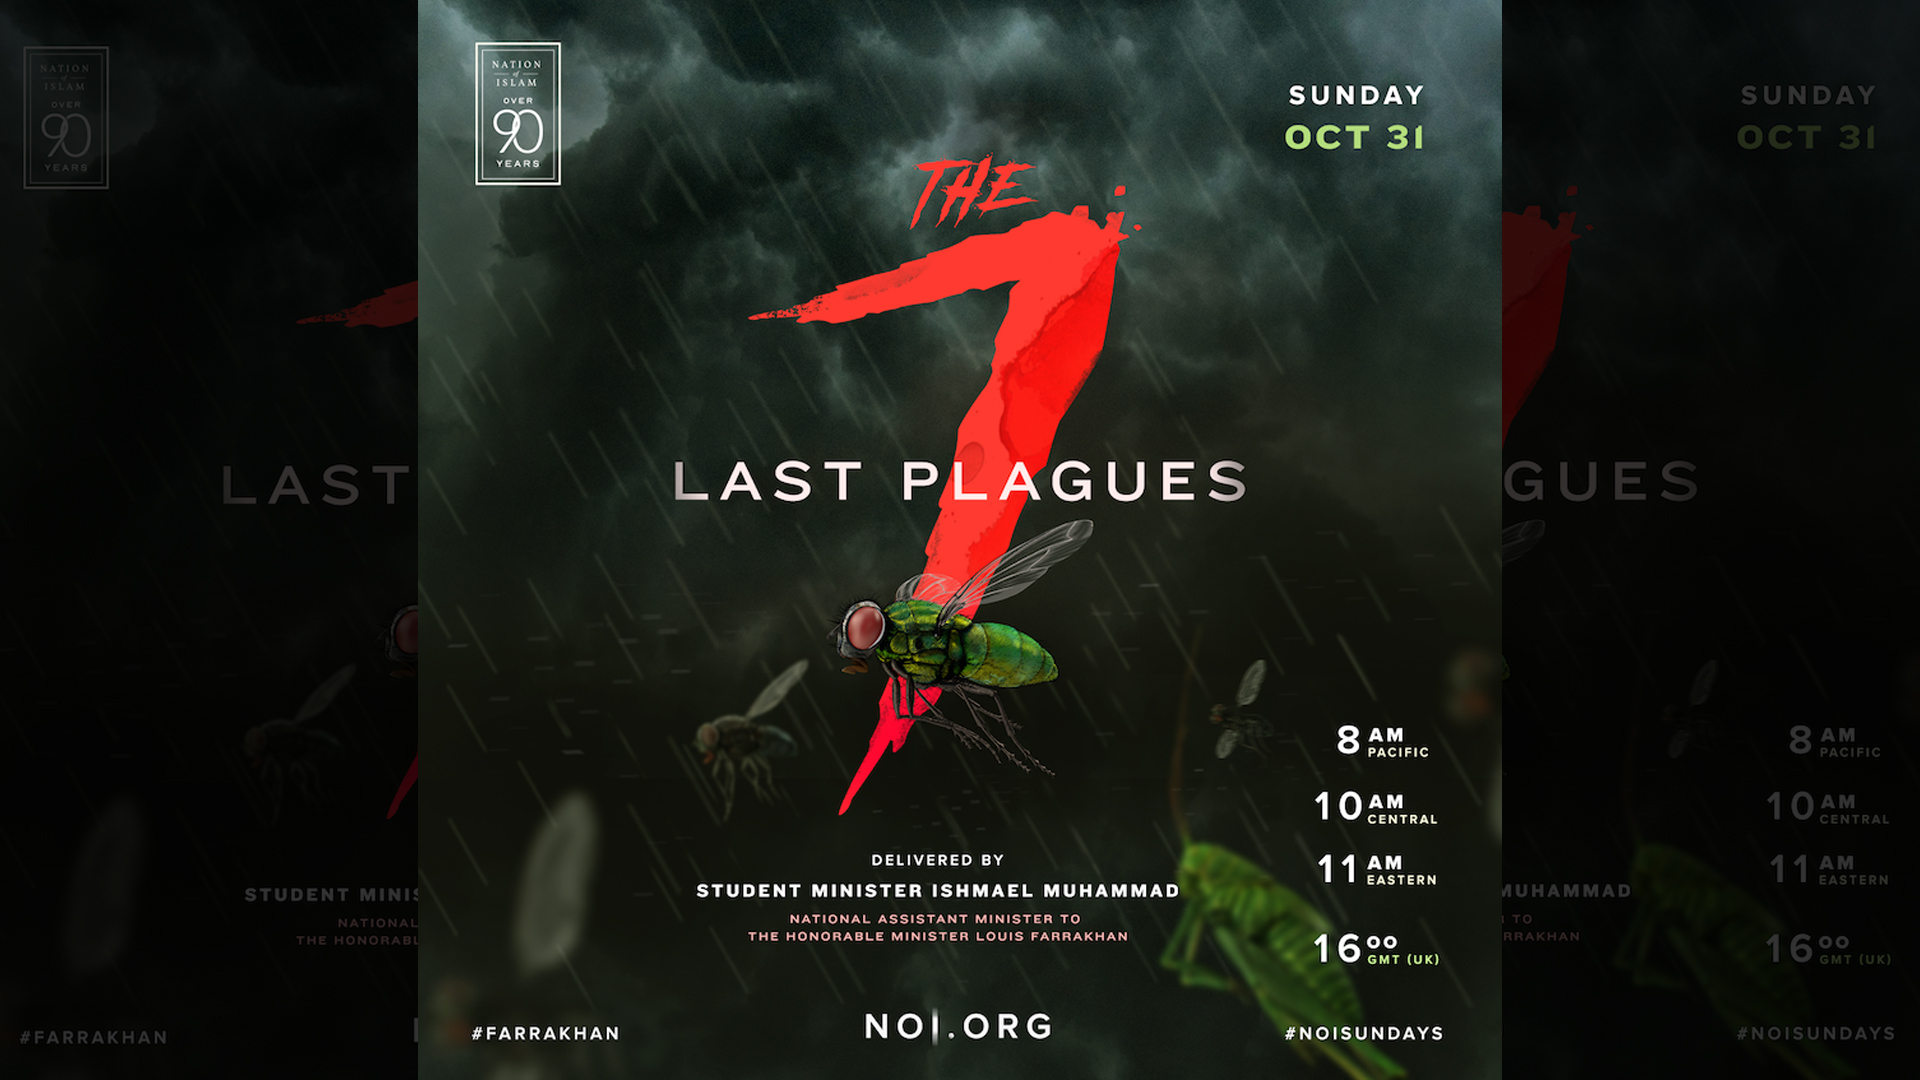 The 7 Last Plagues: Delivered by Student Minister Ishmael Muhammad